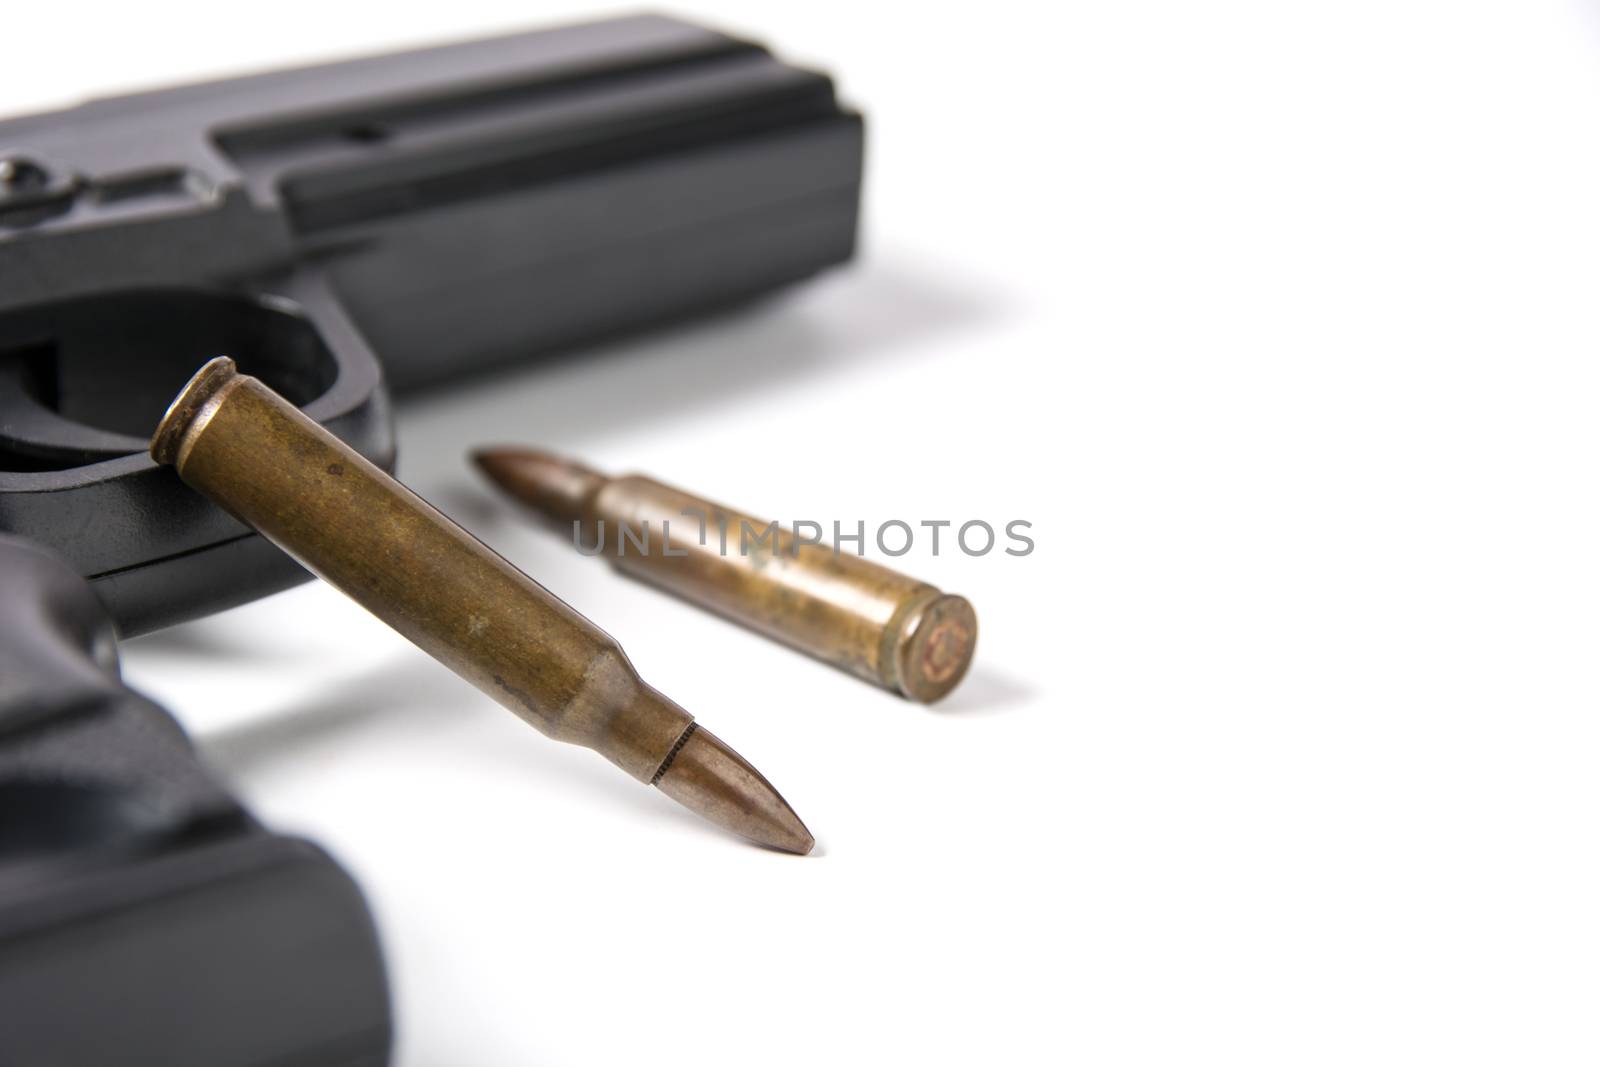 Hand gun sitting with m-16 bullets isolated on white background.